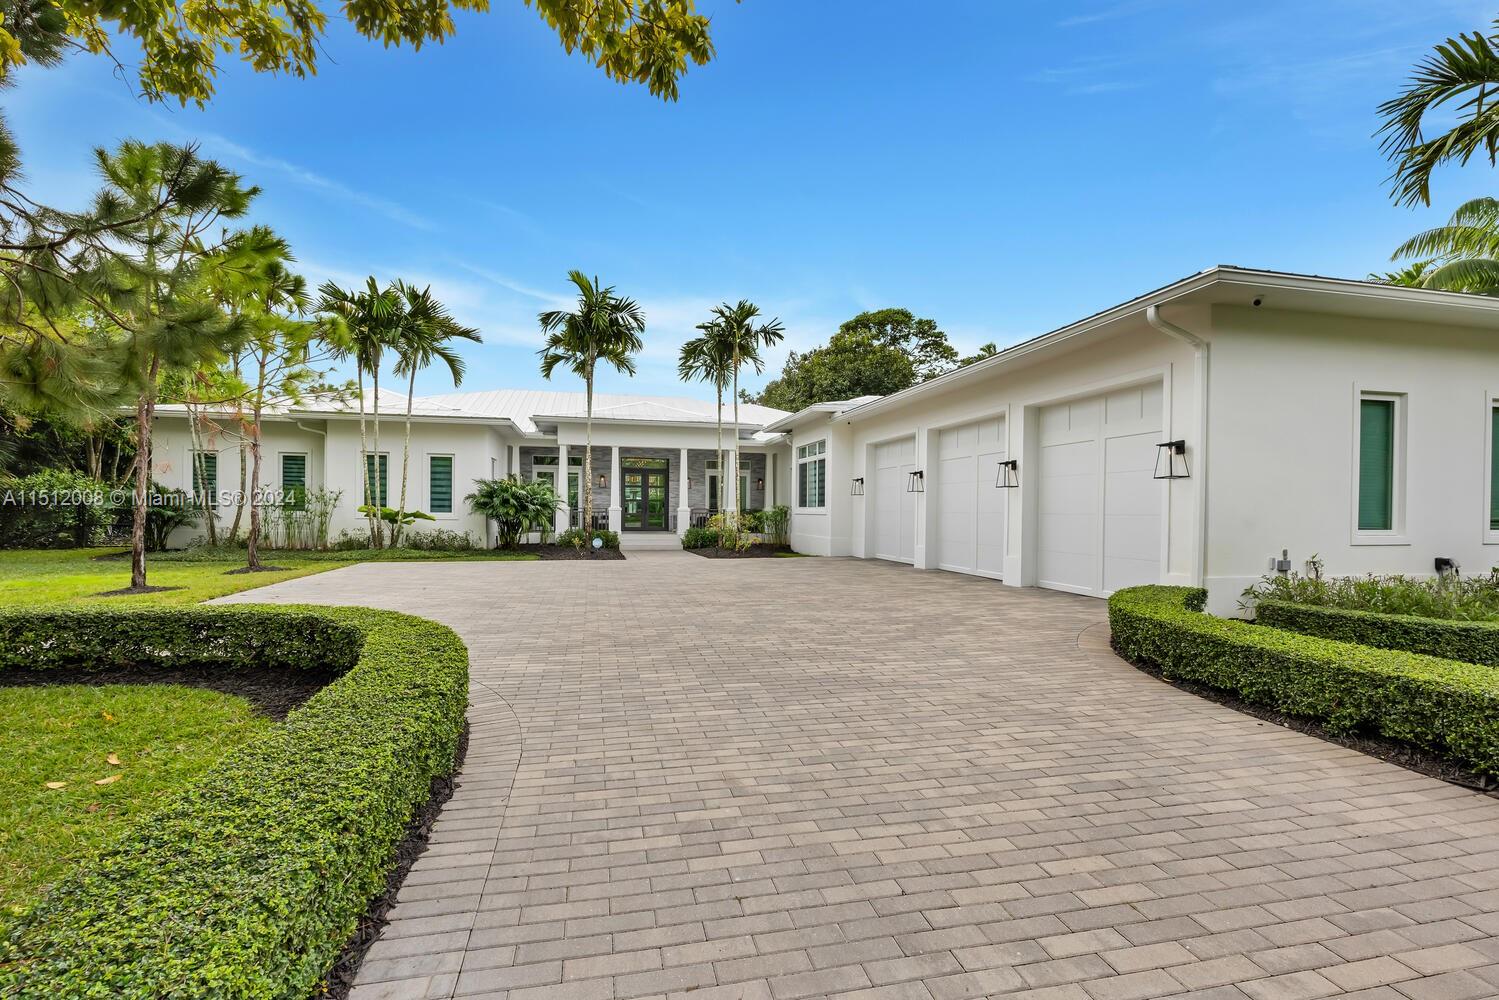 7920 Sw 122nd St St, Pinecrest, Miami-Dade County, Florida - 5 Bedrooms  
6 Bathrooms - 